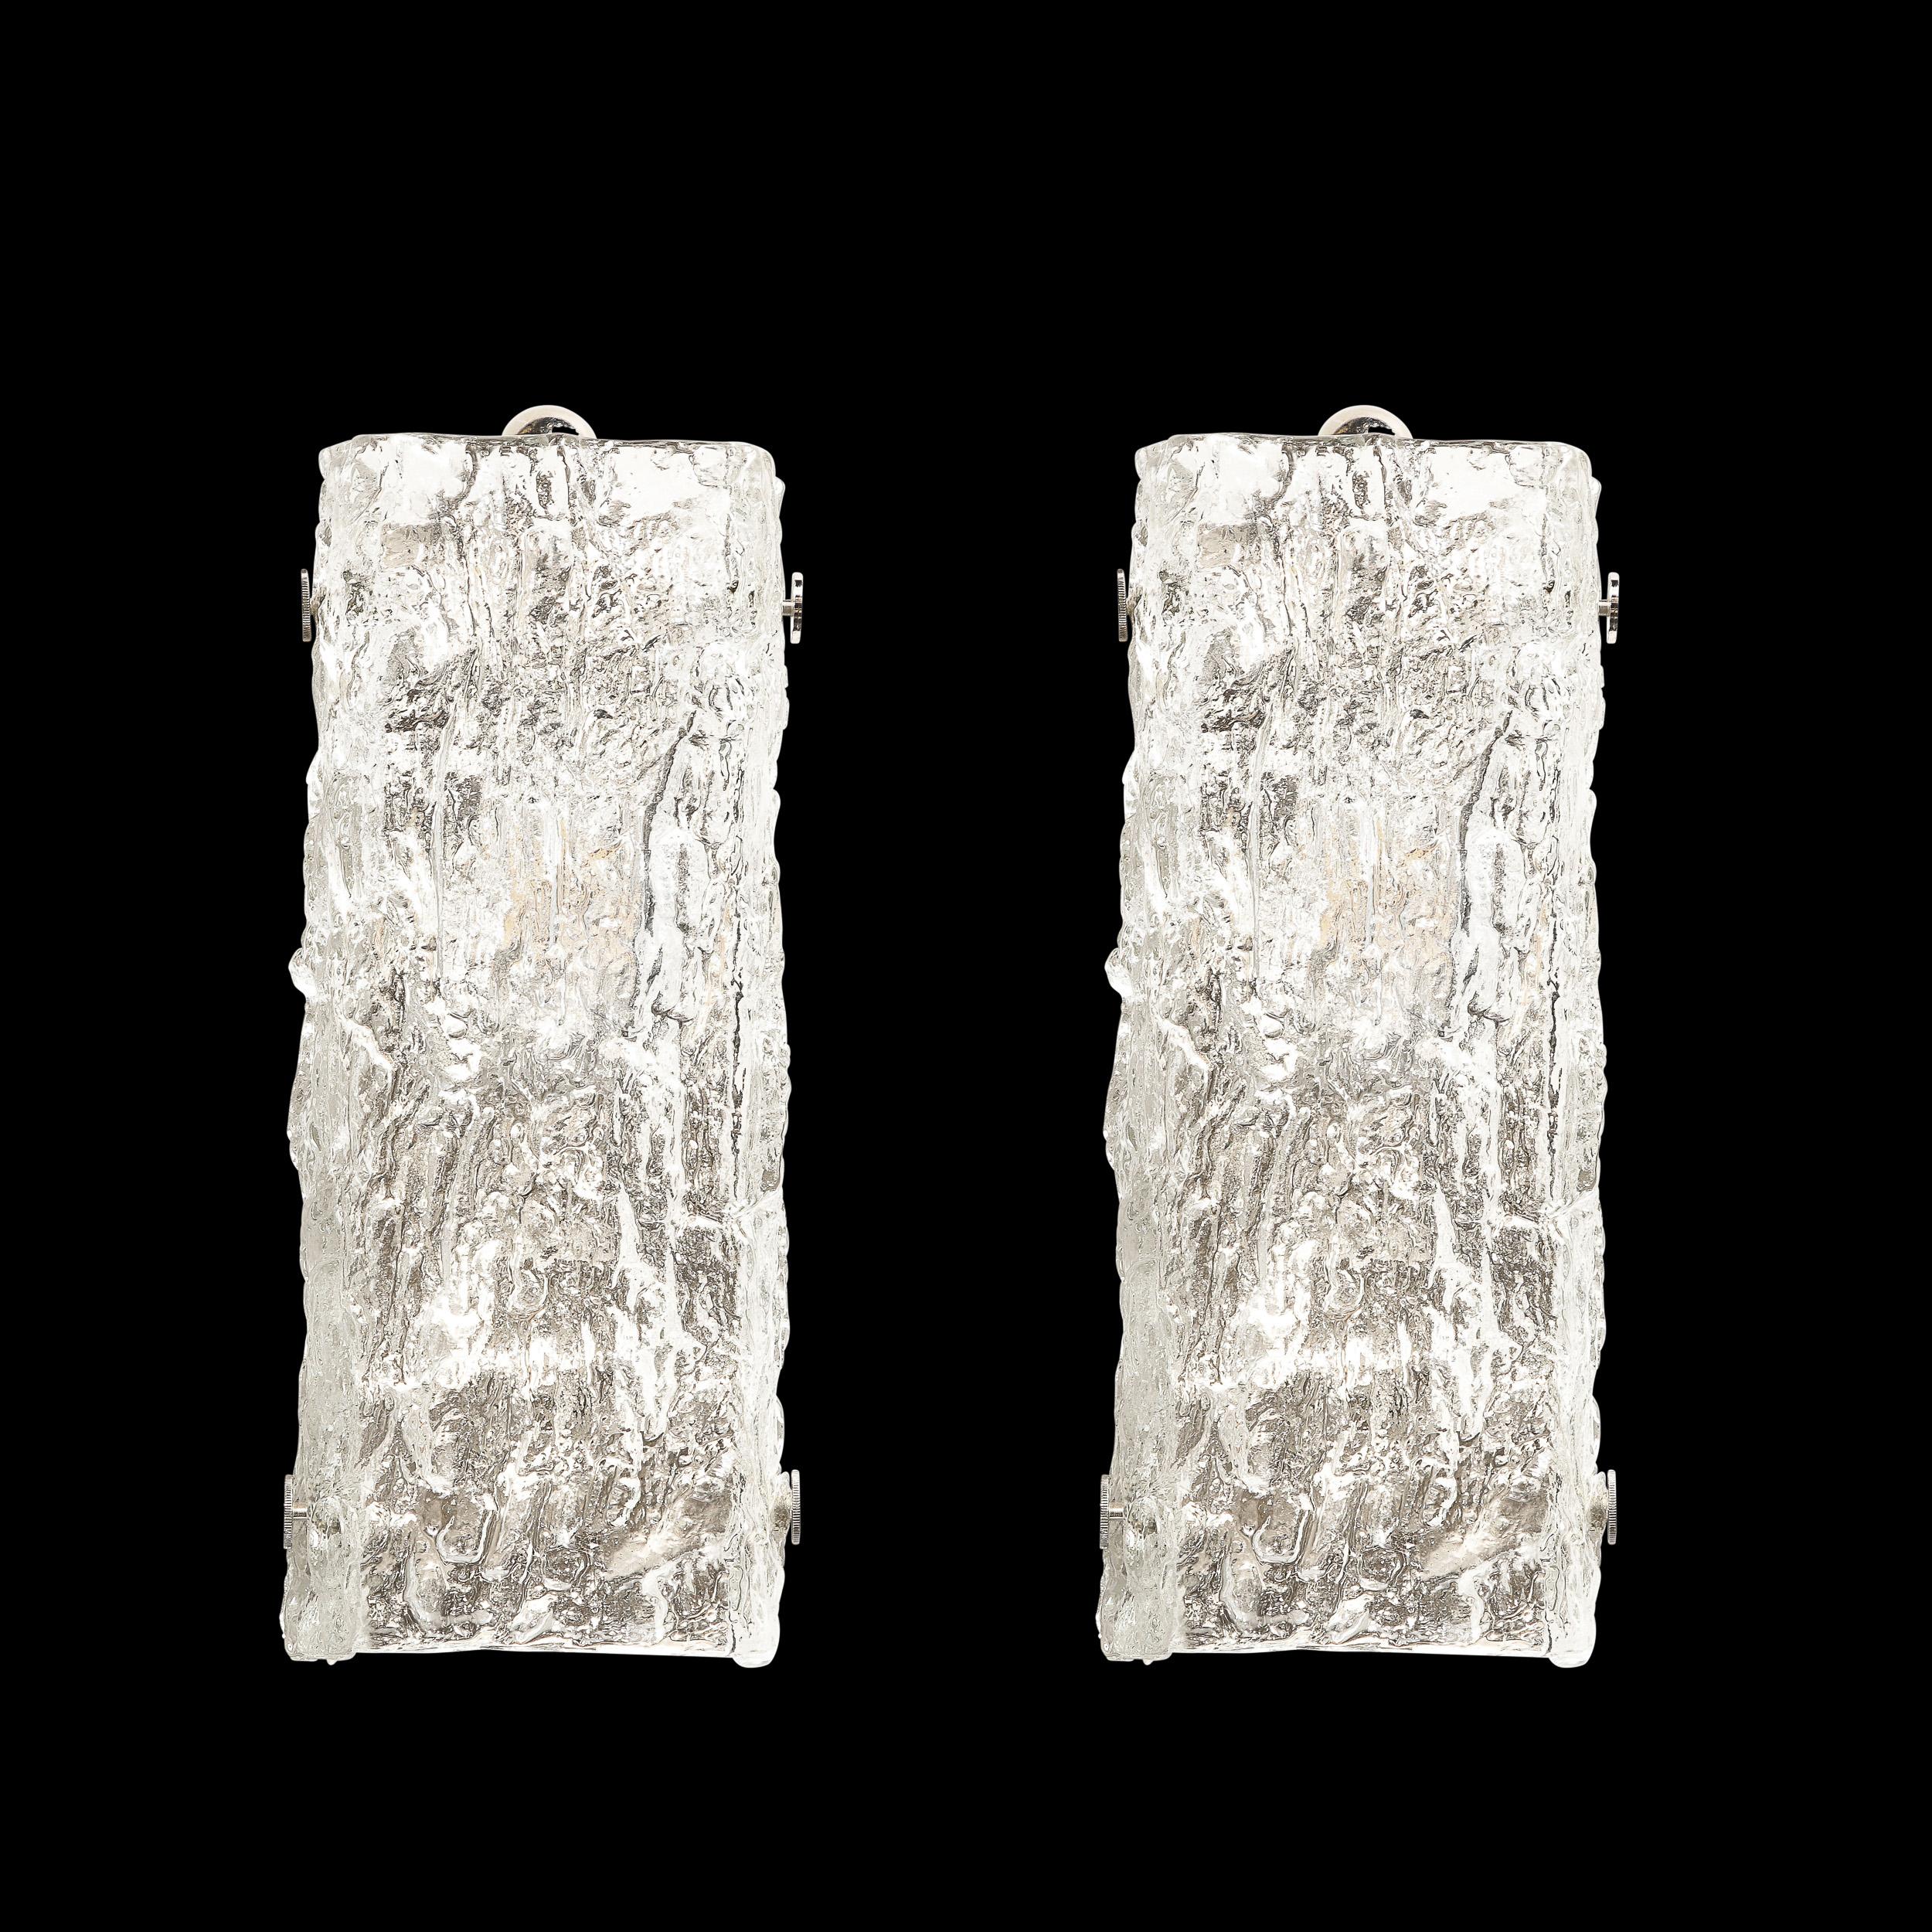 This elegantly subtle pair of Mid-Century Modernist Ice Glass Sconces are by J.T. Kalmar and originate from Austria, Circa 1960. They feature a minimal rectangular profile with a translucent glass shade diffusing light and illuminating the